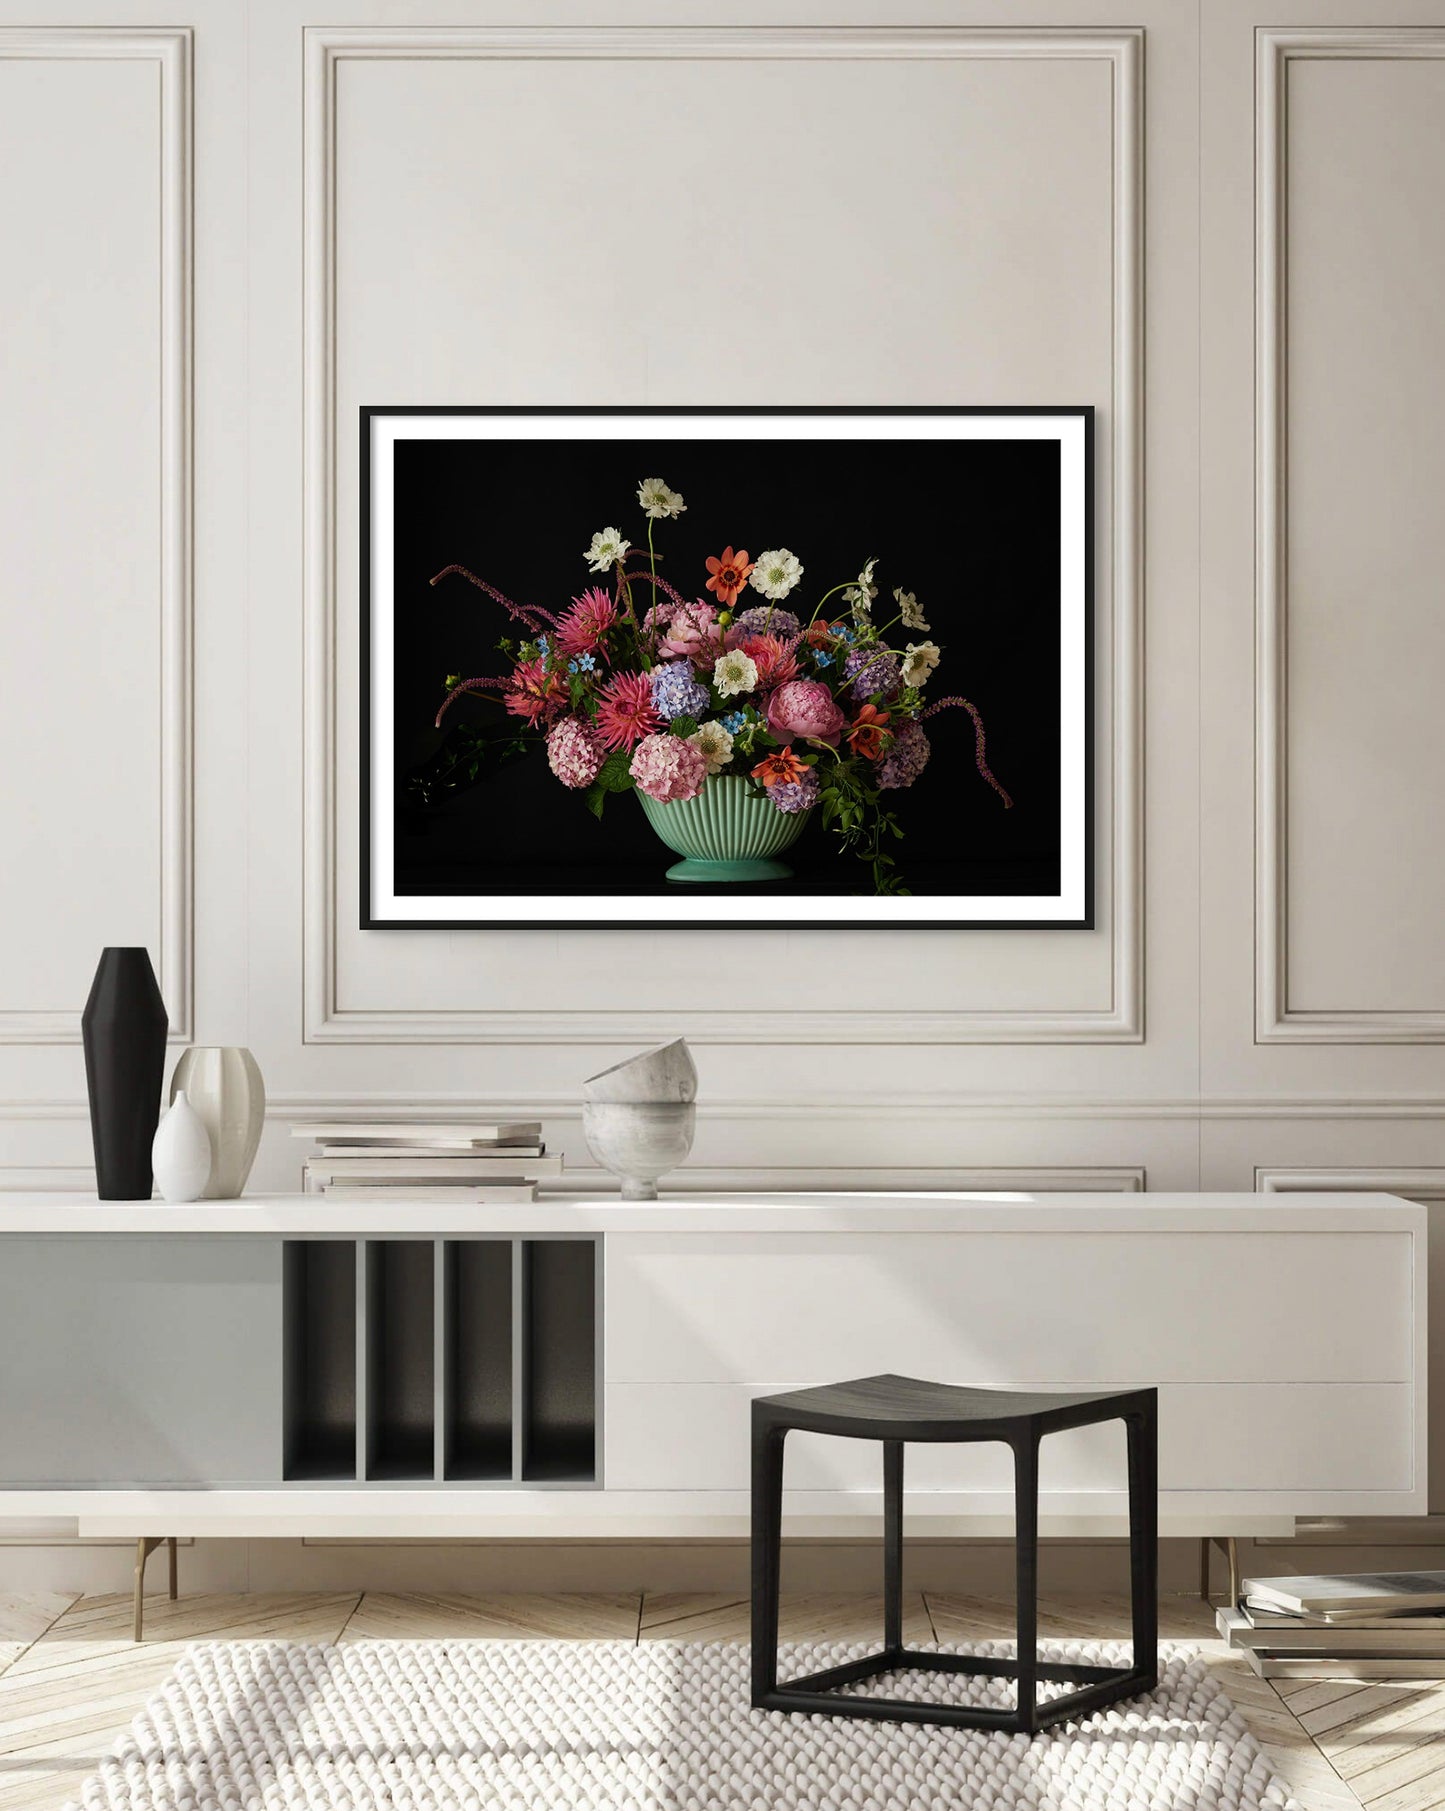 'BETSY' Extra Large Framed Photographic Flower Print Displayed in Neutral Pannelled Living Room